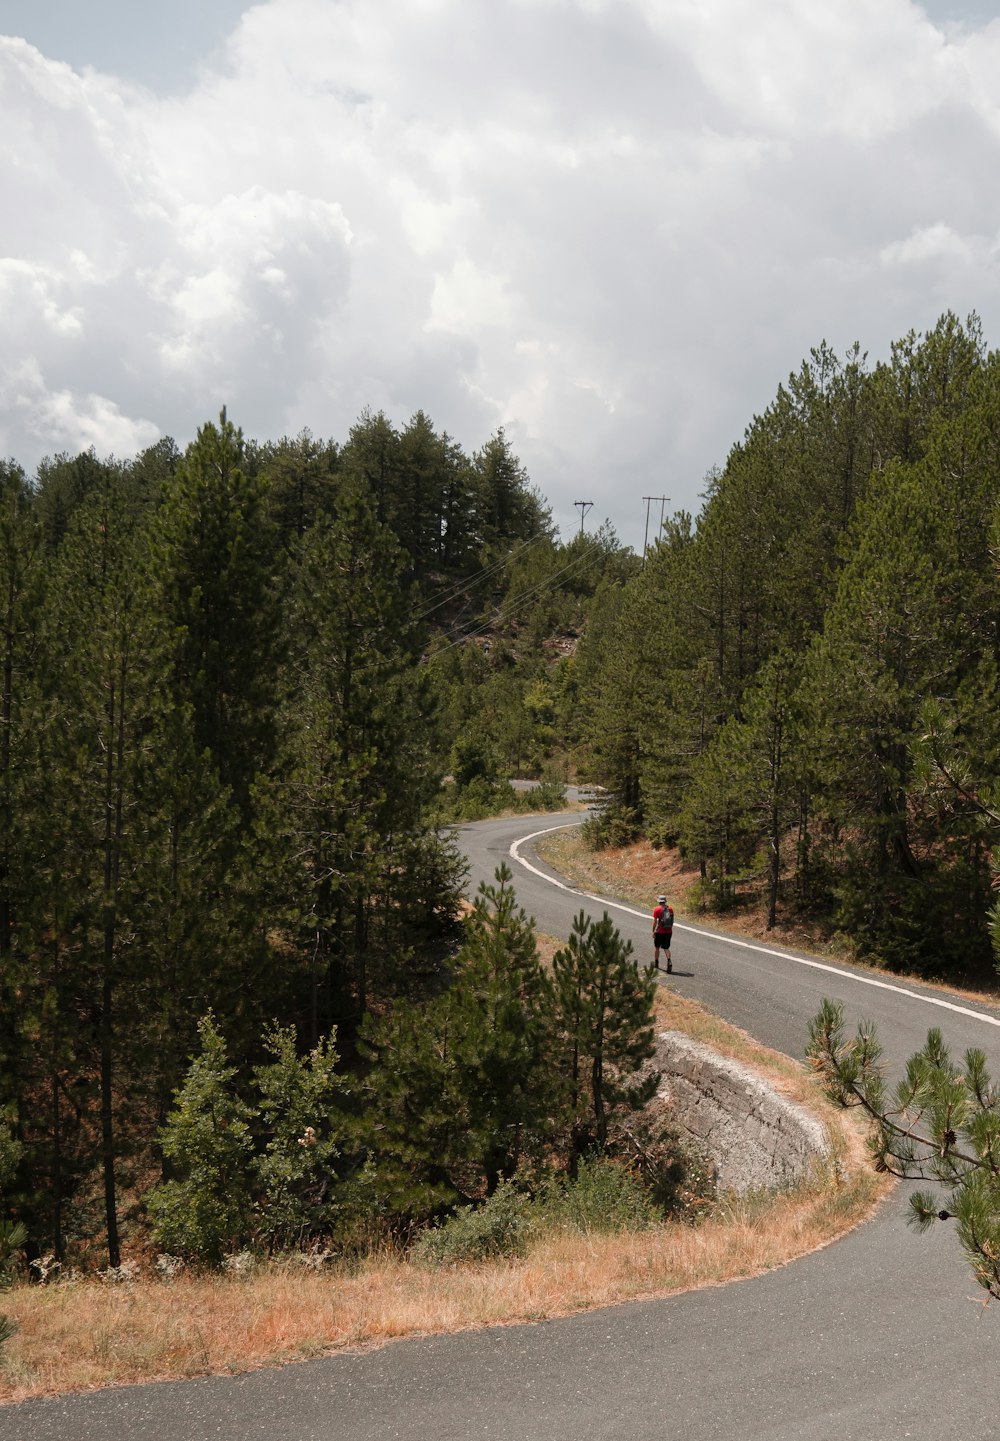 a person riding a bicycle on a road surrounded by trees